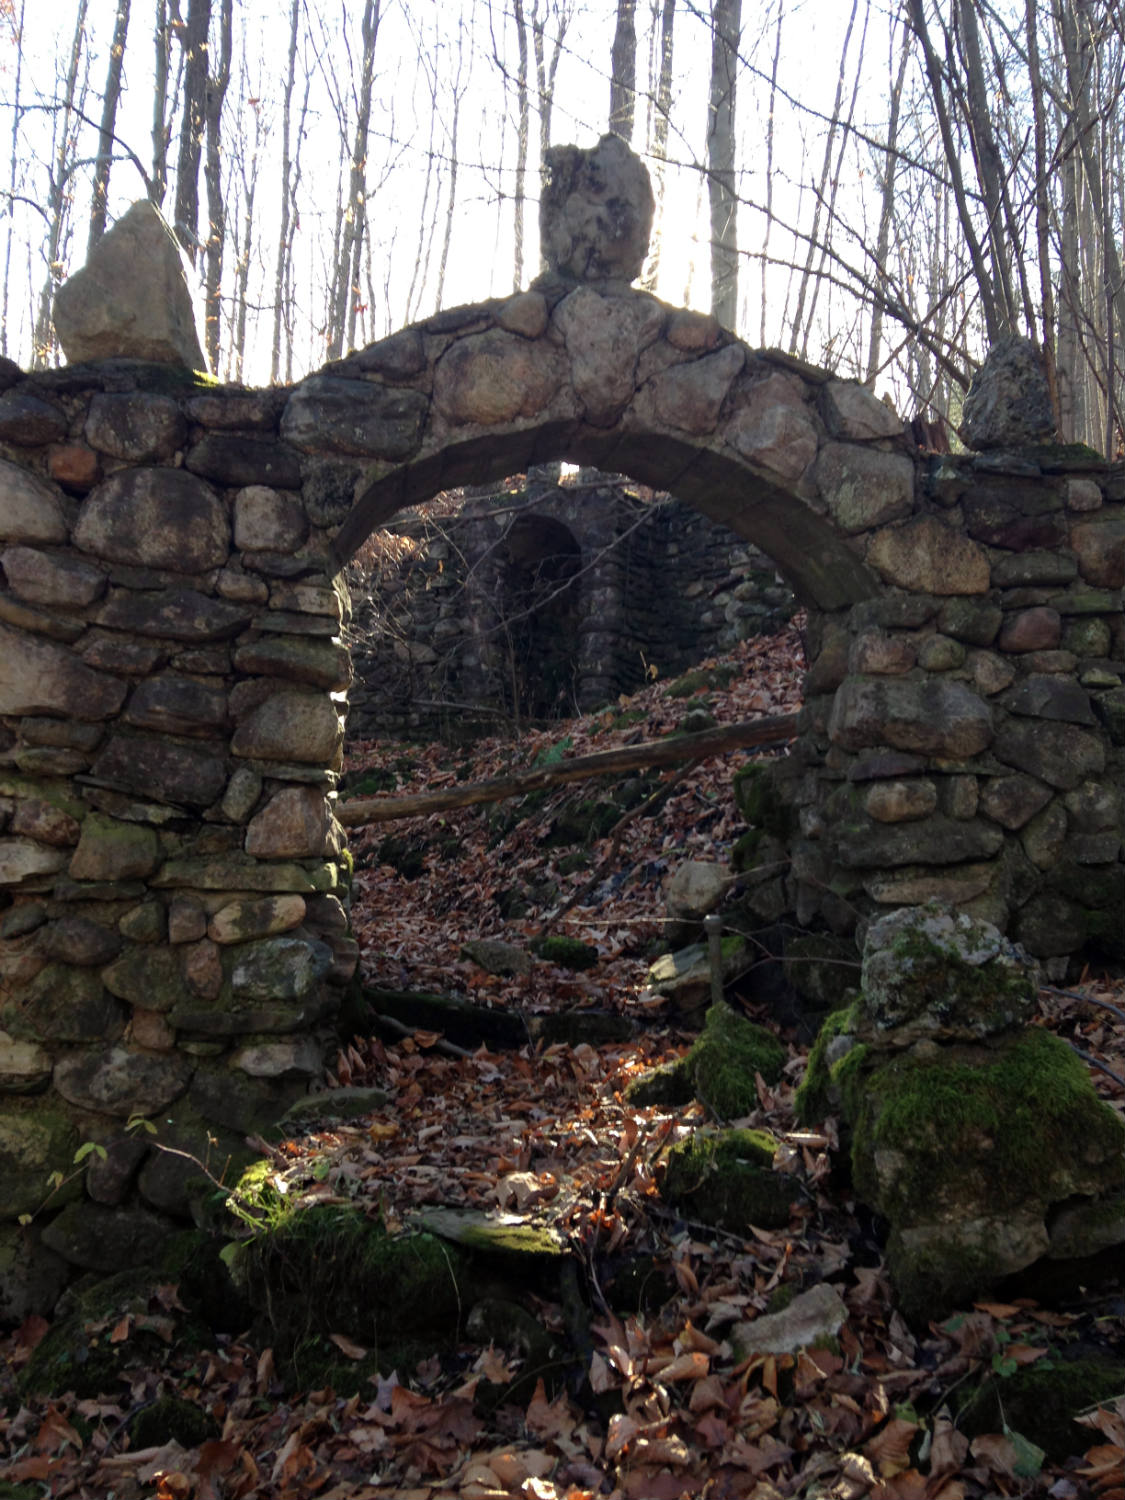 Grotto Entrance at former St. Michael's Mission in Conesus, NY